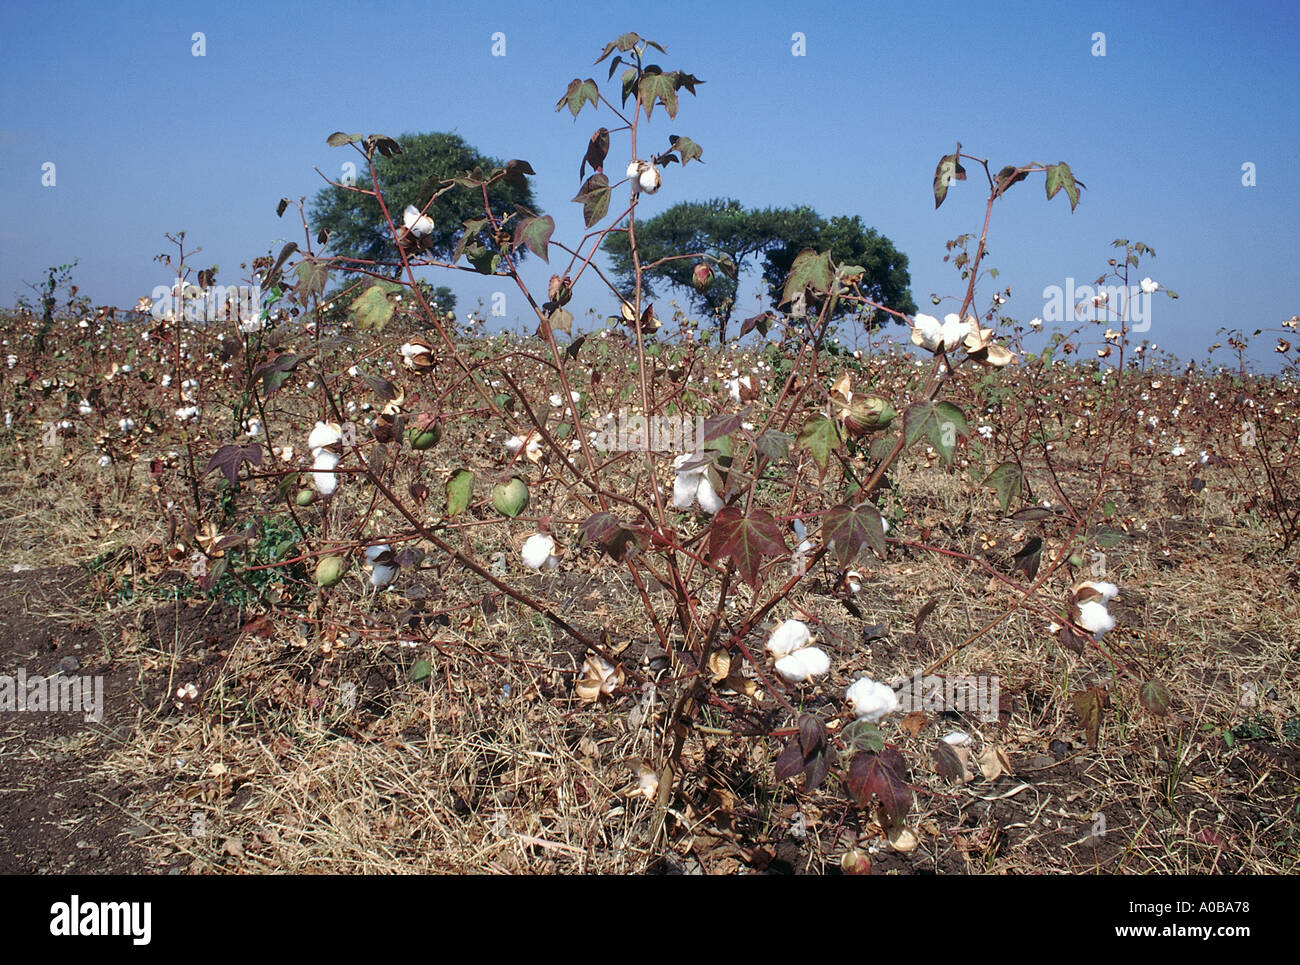 Mature cotton plant A mature cotton plant with cotton balls just prior to picking Stock Photo